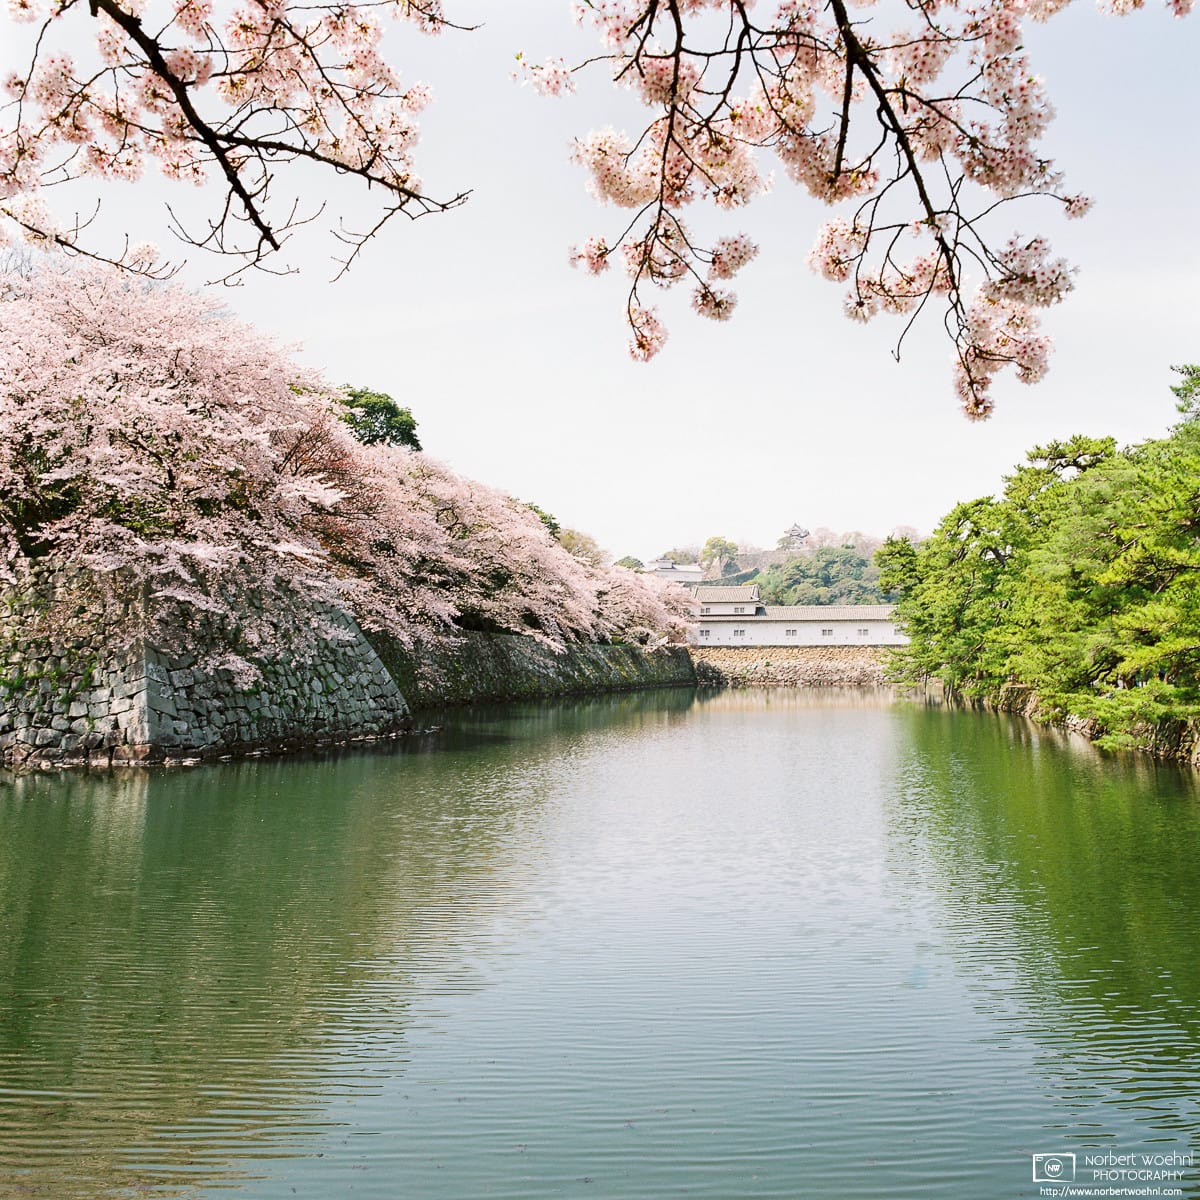 Cherry Blossoms in full bloom along the moat of Hikone Castle in Shiga Prefecture, Japan.